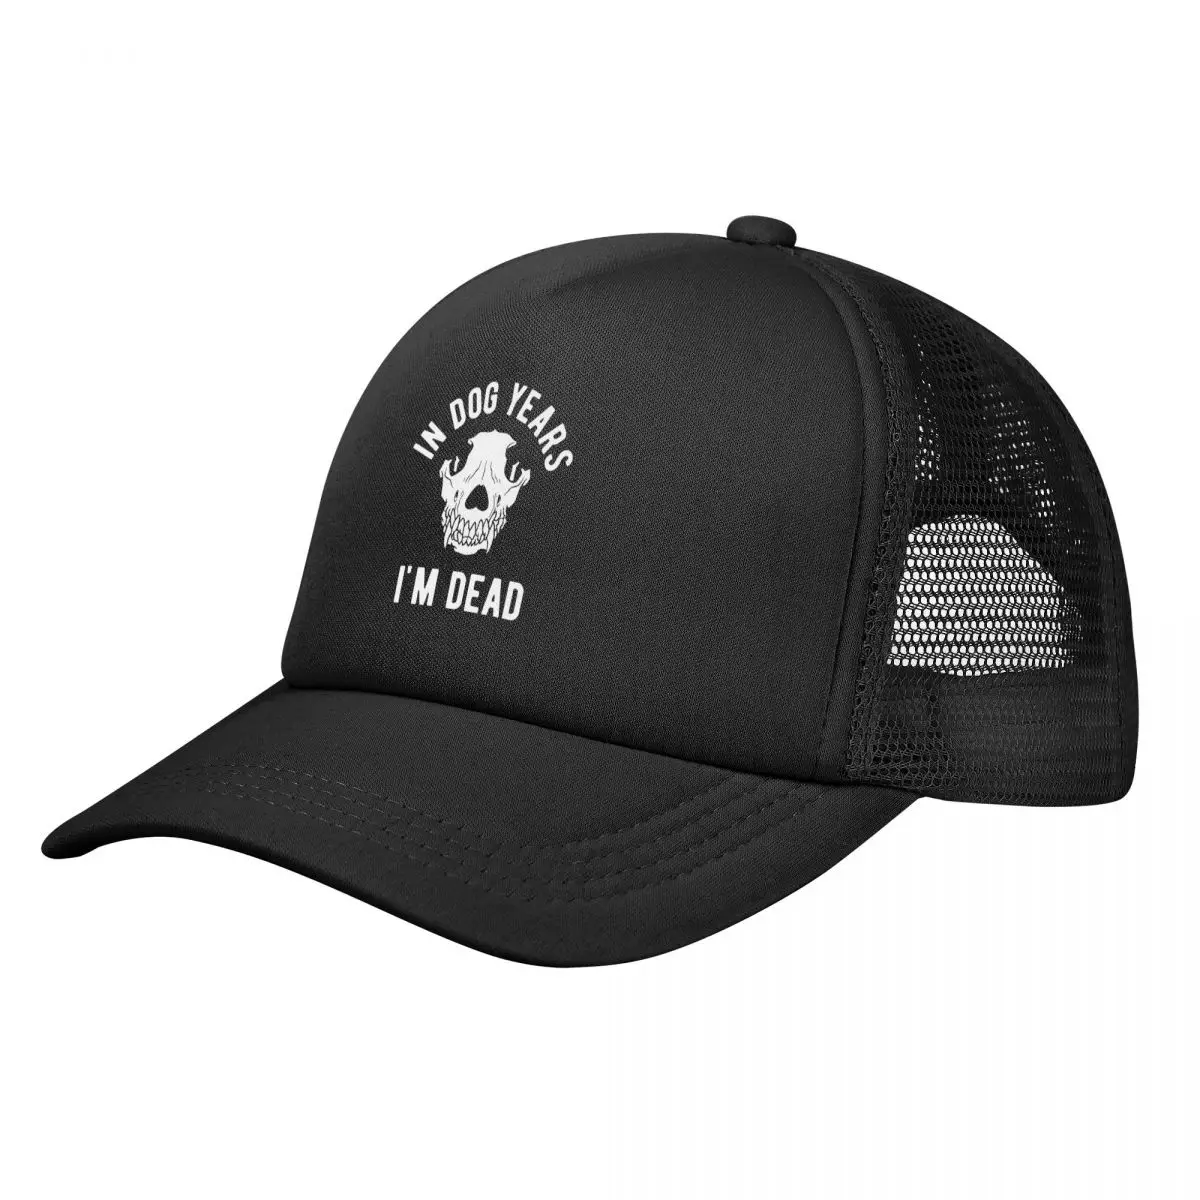 

In Dog Years I'm Dead Over The Hill Mesh Baseball Cap Adult Hiphop Trucker Hat Adjustable Snapback Caps Racing Cap Wholesale New